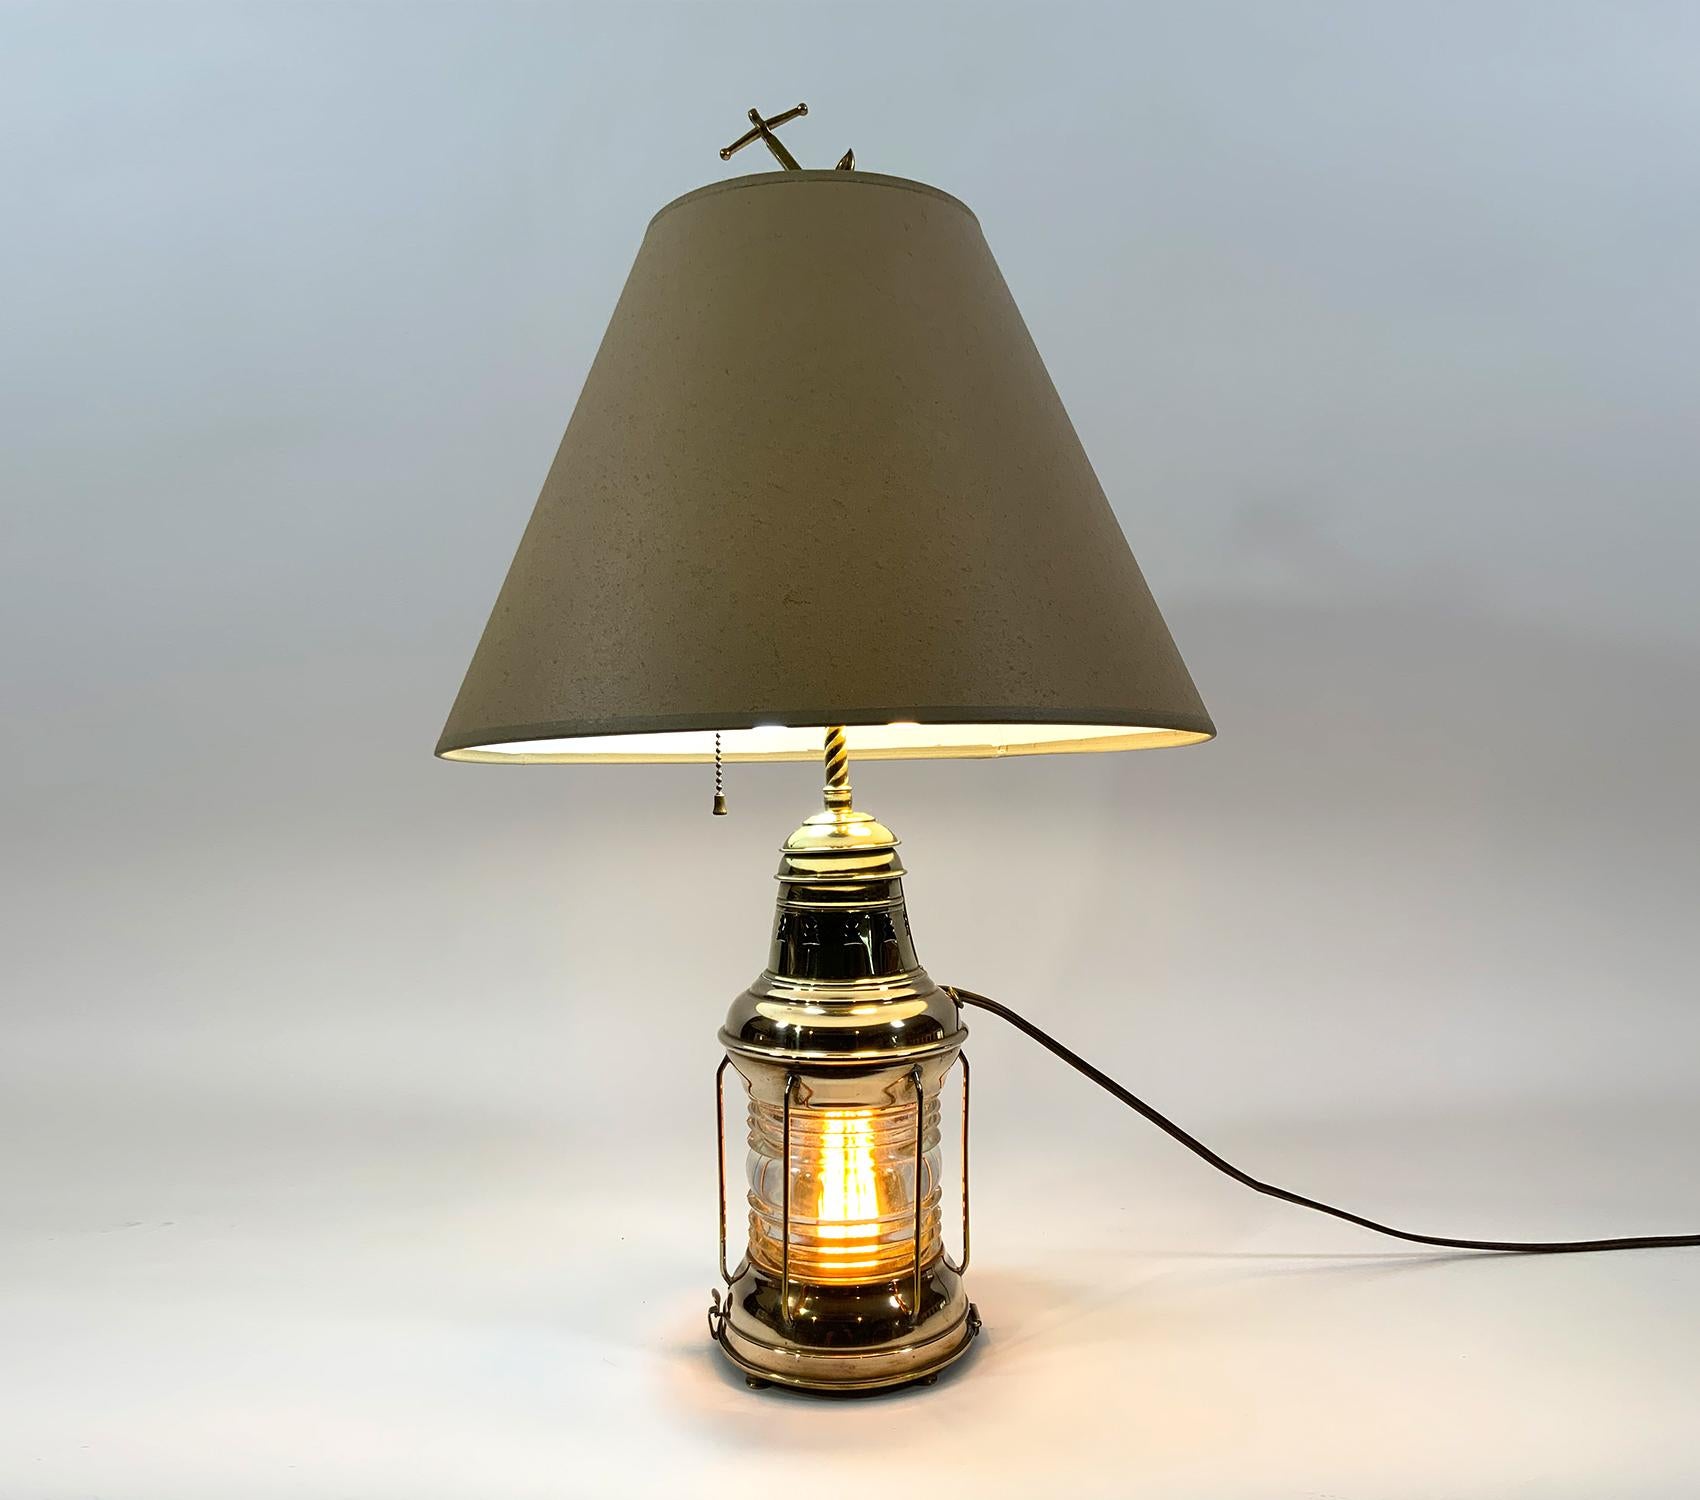 Solid brass ships lantern by Perko, a highly polished and lacquered ships anchor lantern that has been converted to a lamp. With canvas shade. Lantern has a glass Fresnel lens, and protective brass bars. Lamp is wired with electric